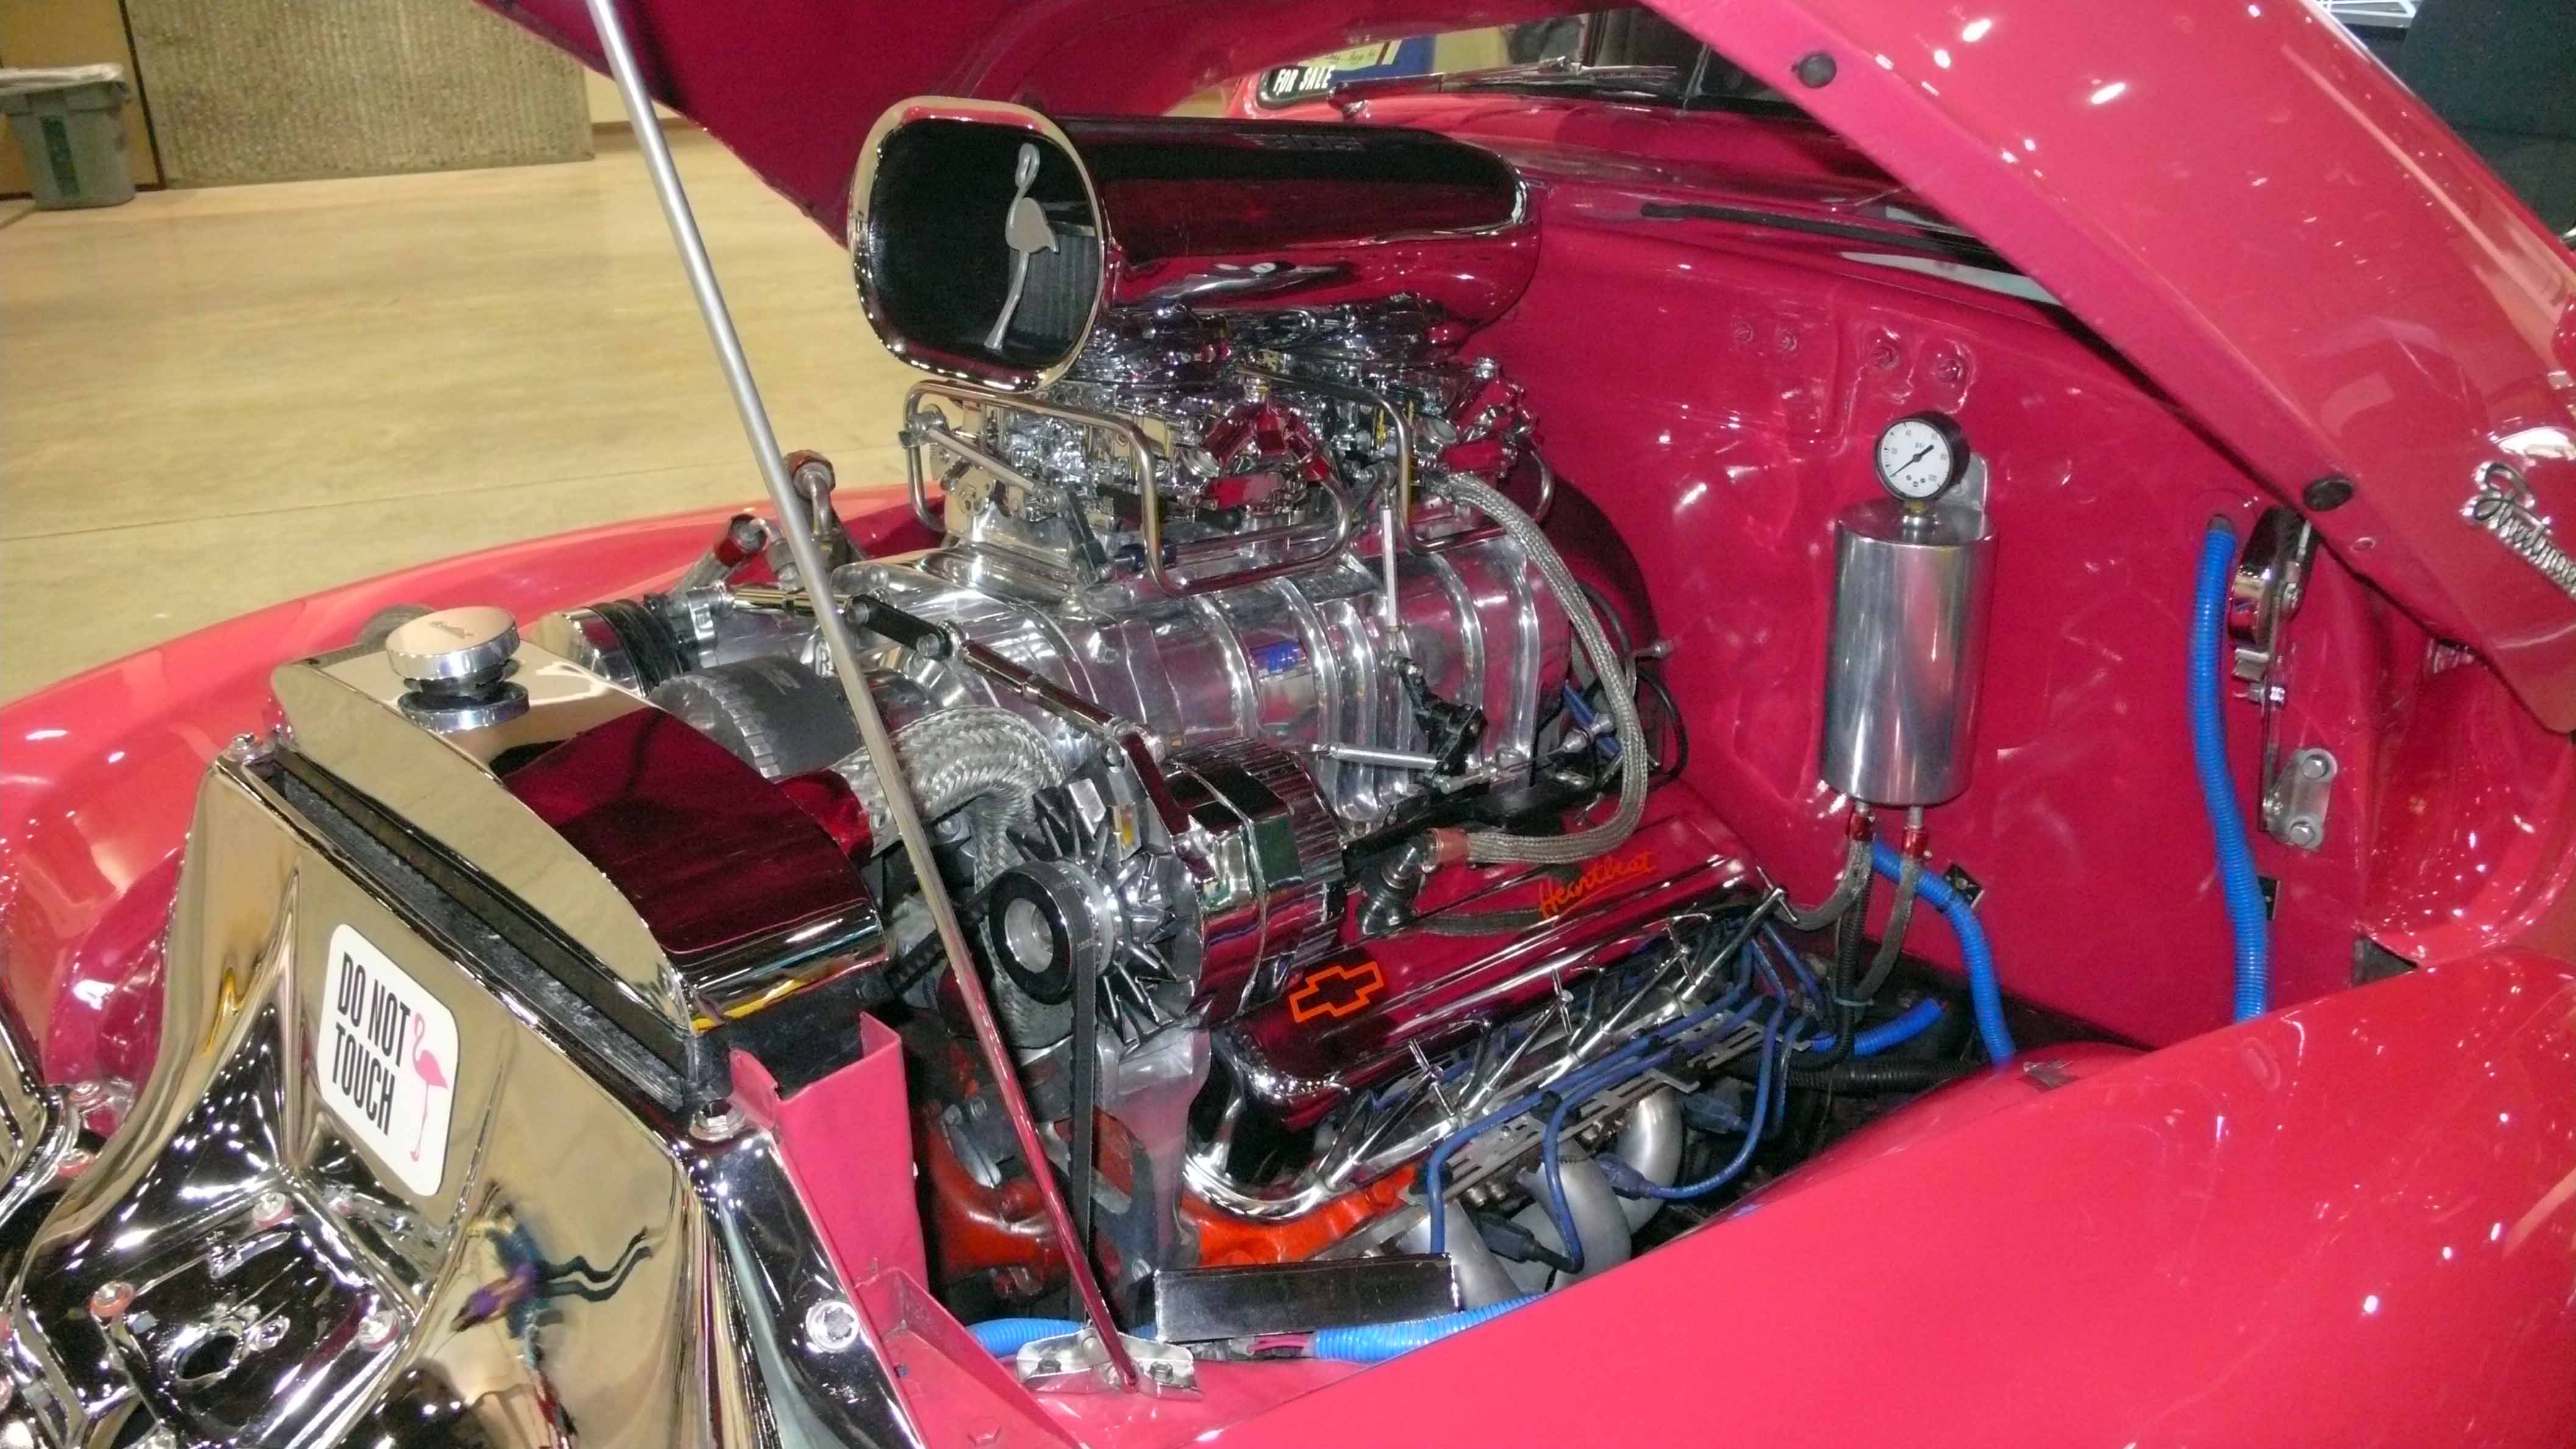 ChevyV8Supercharged